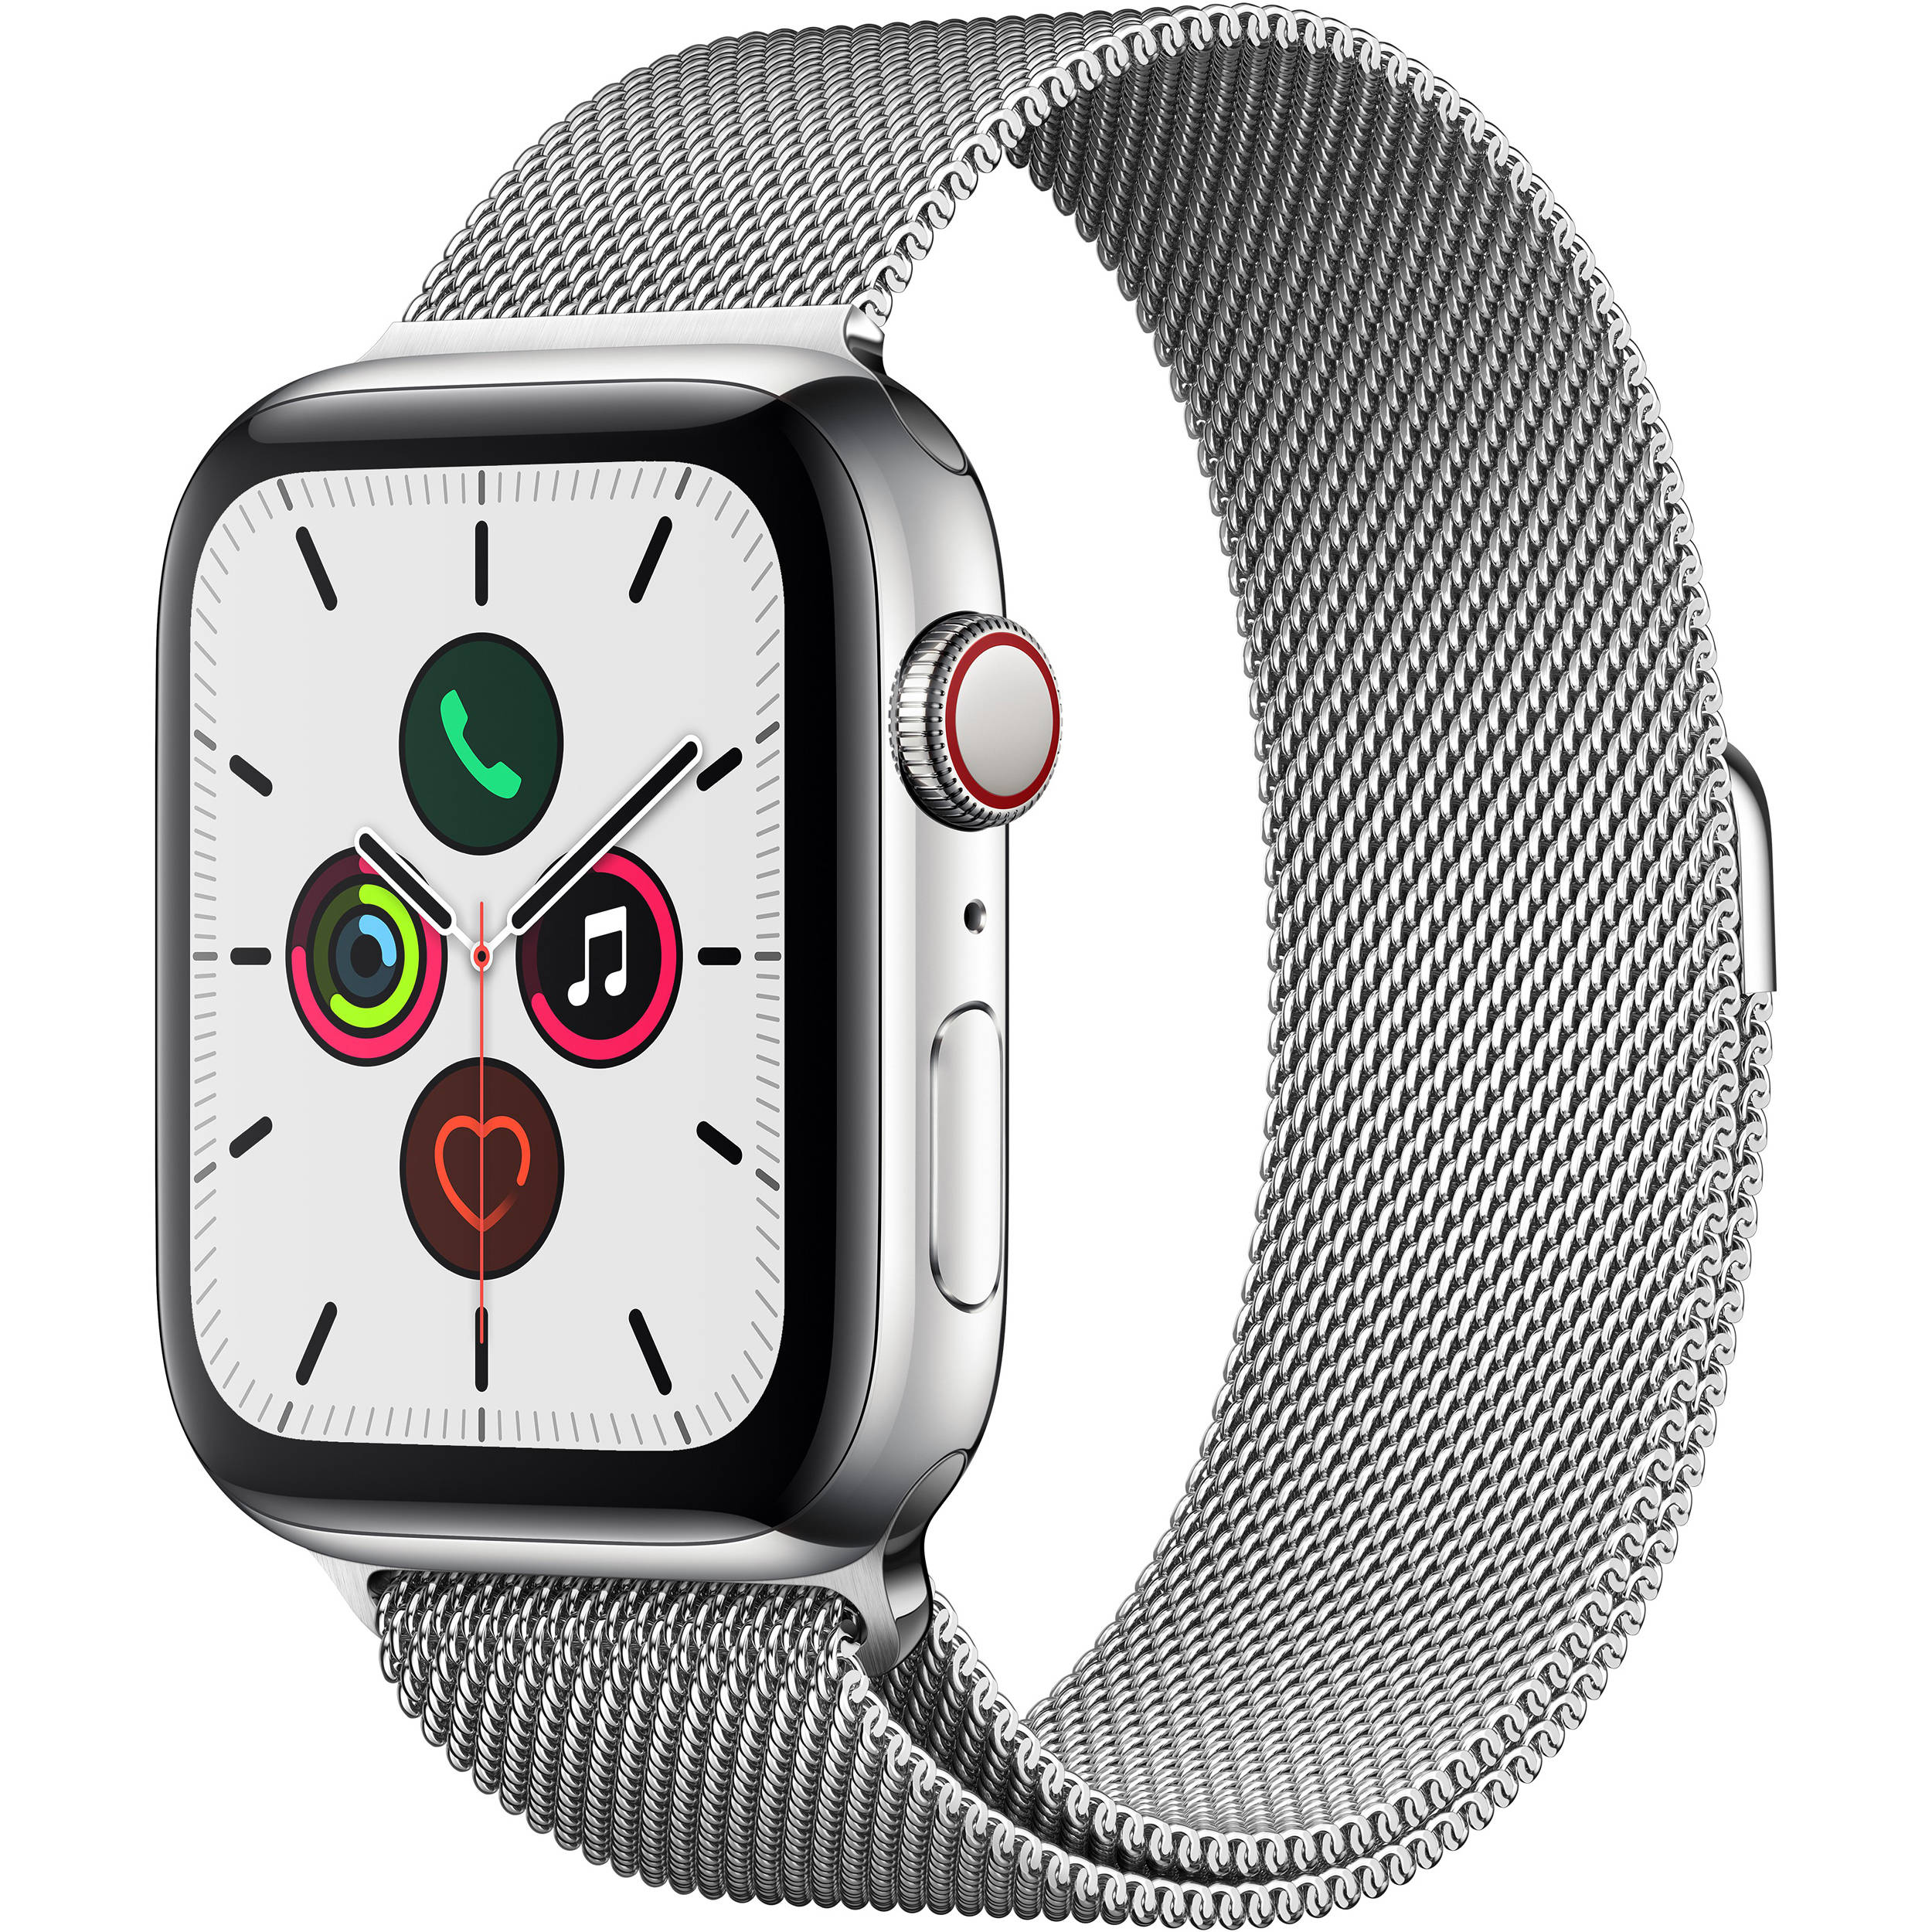 Apple Watch Series 5 Cellular Silver Stainless Steel 44mm Silver Apple Watch 44 Stainless Steel